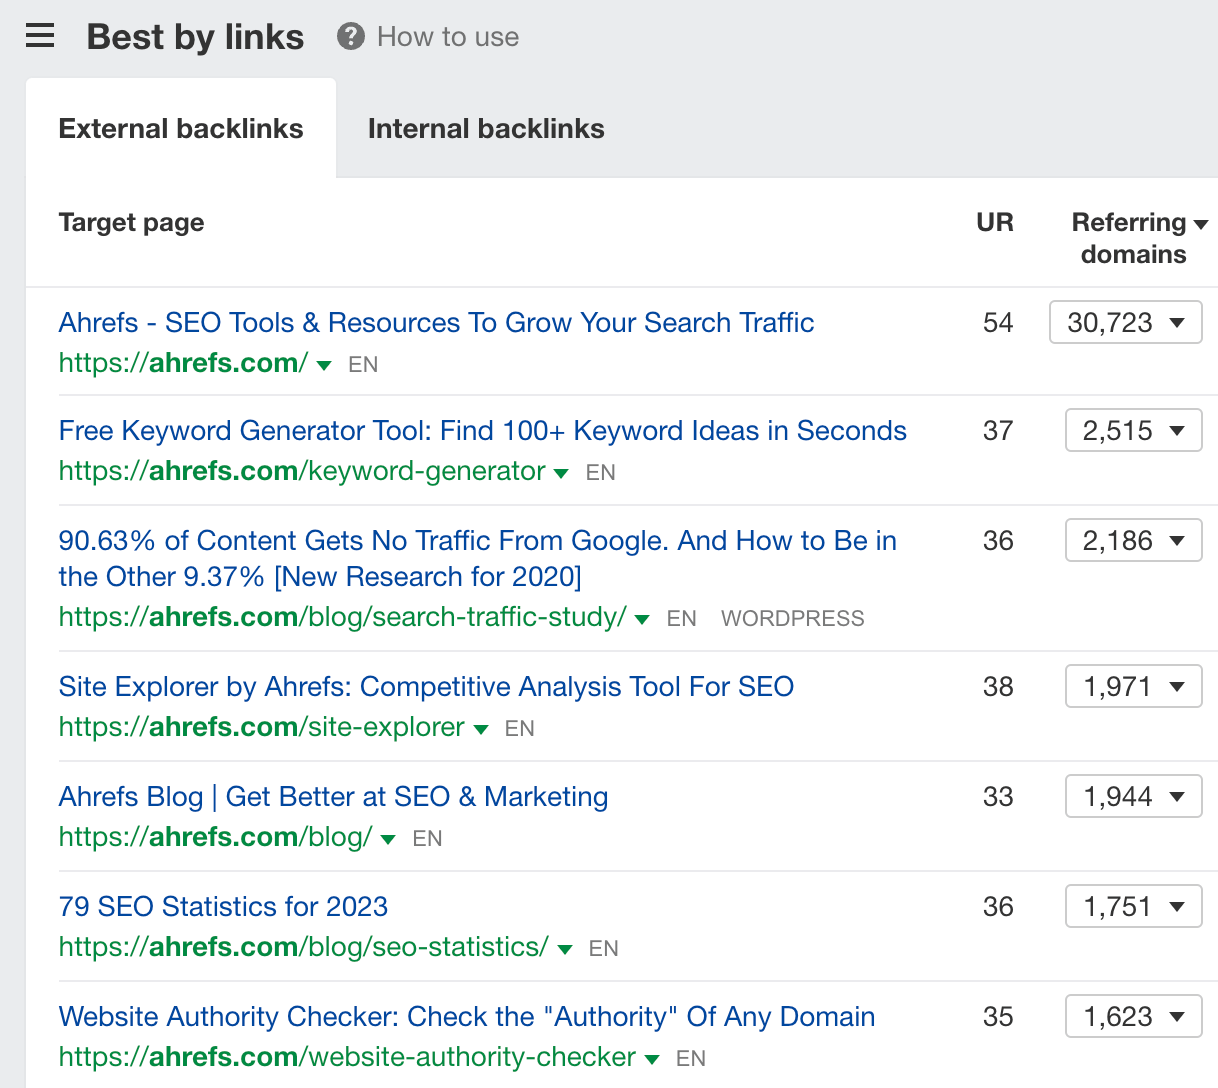 Steal the strategies your competitors use to get links with the Best by links report